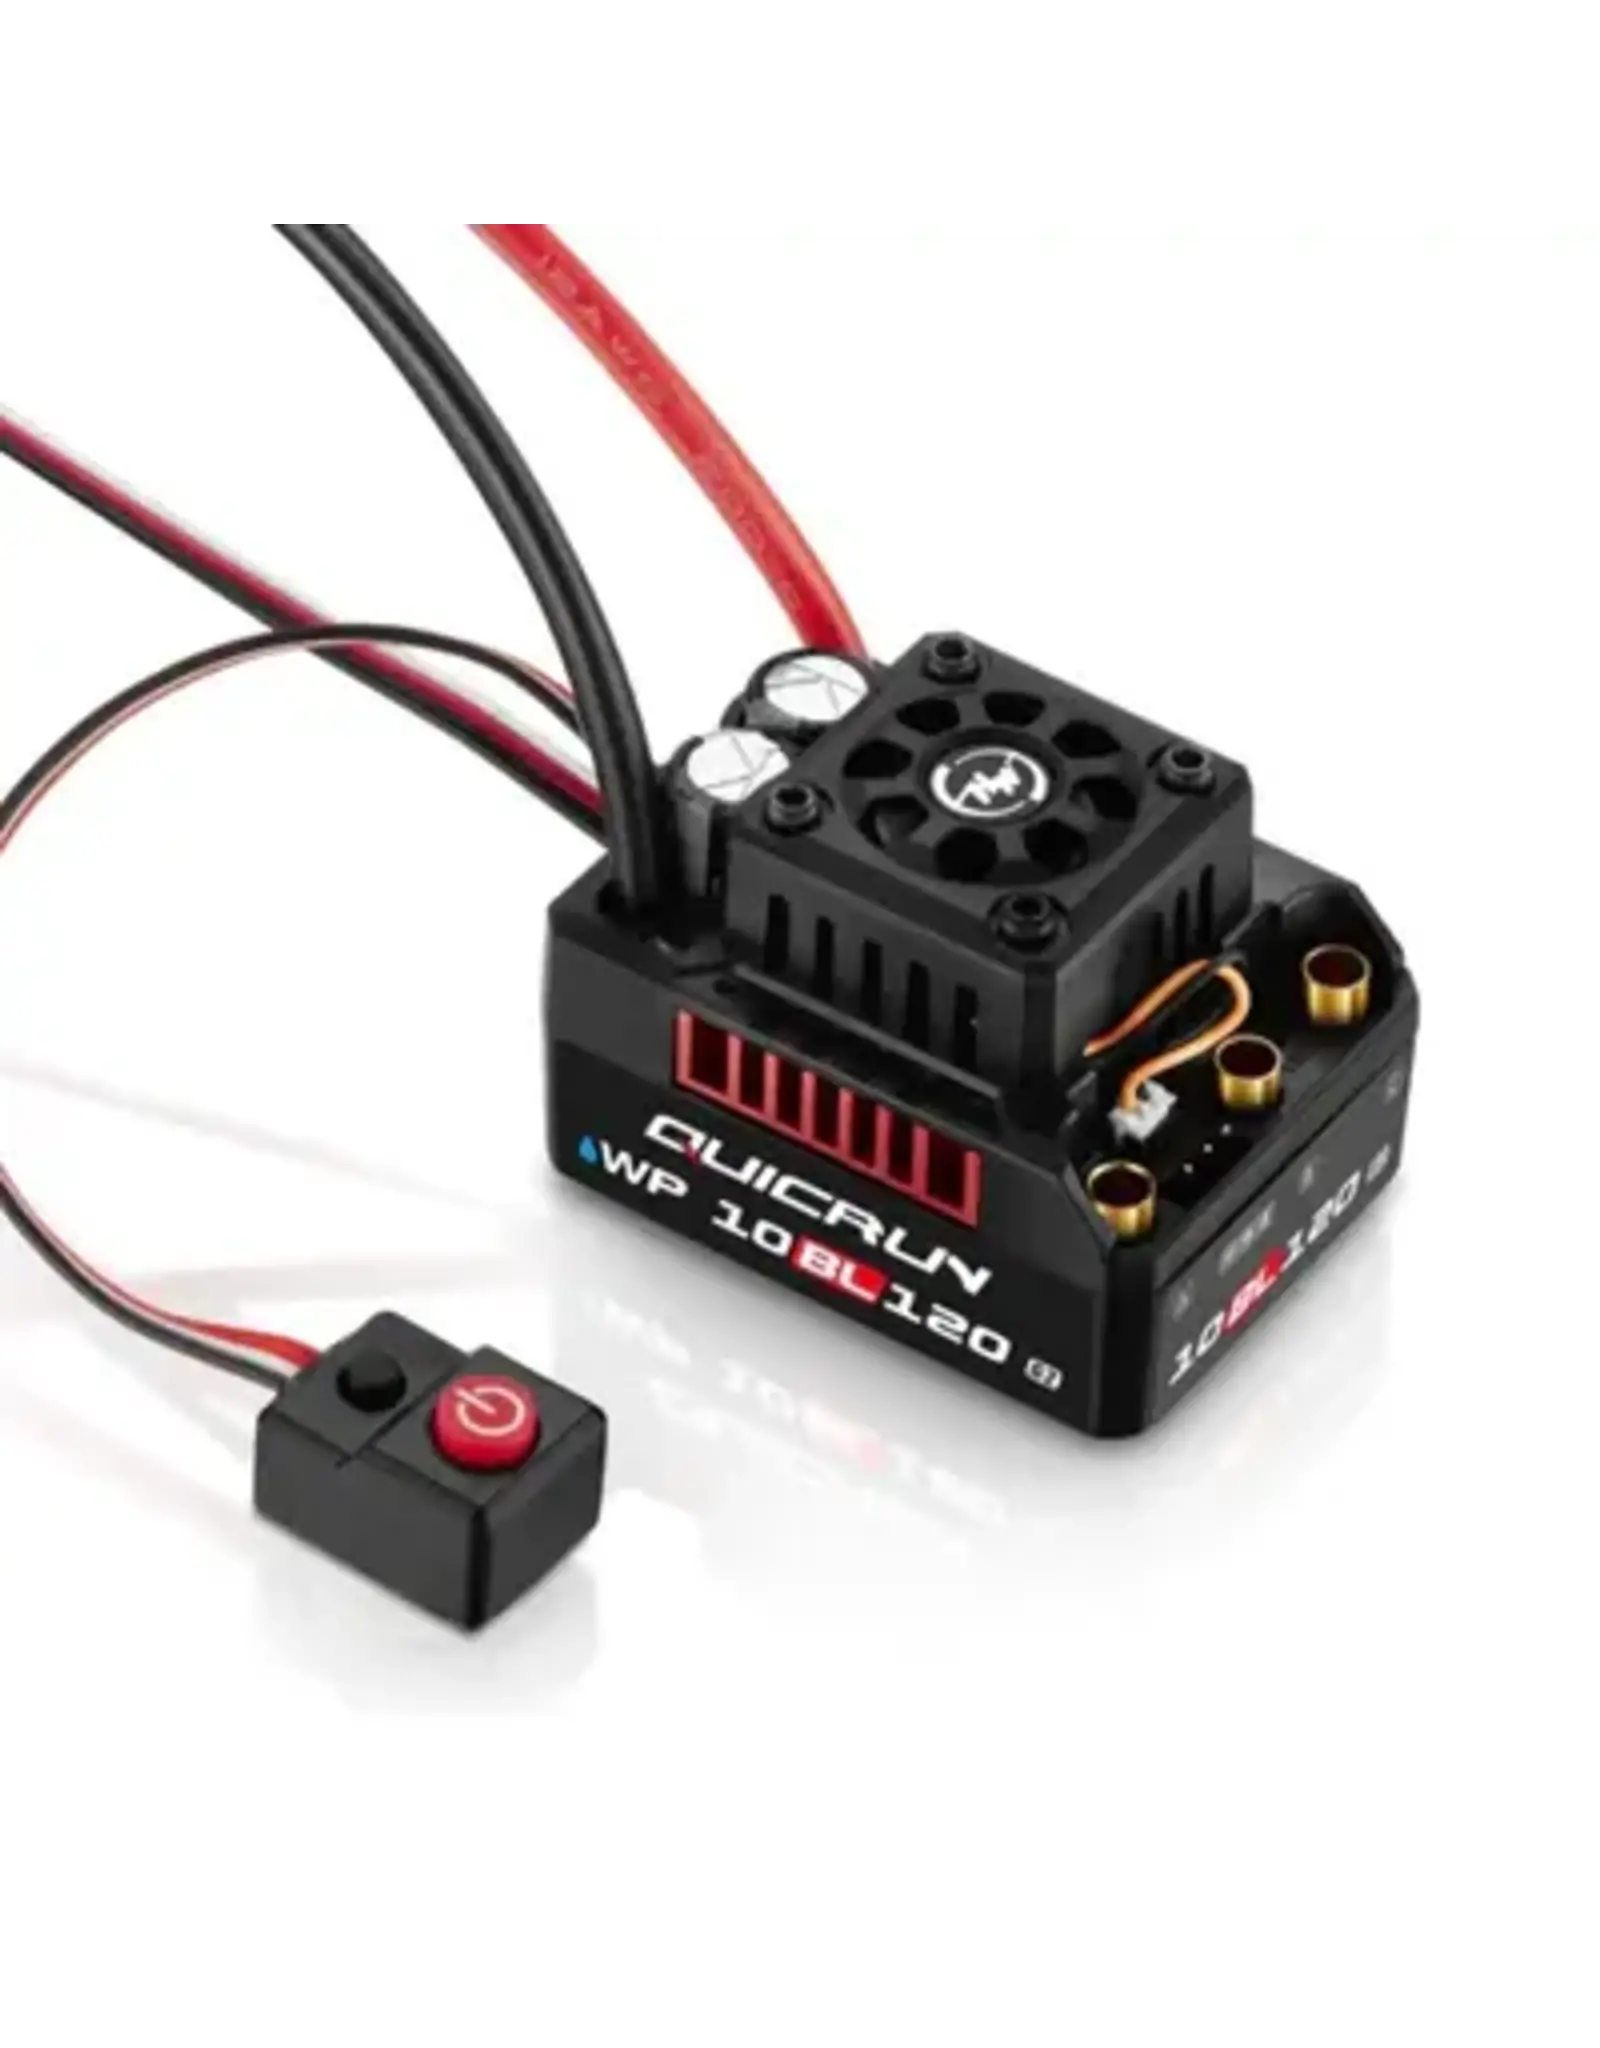 Hobbywing Hobbywing Quickrun 10BL120 Brushless speed control